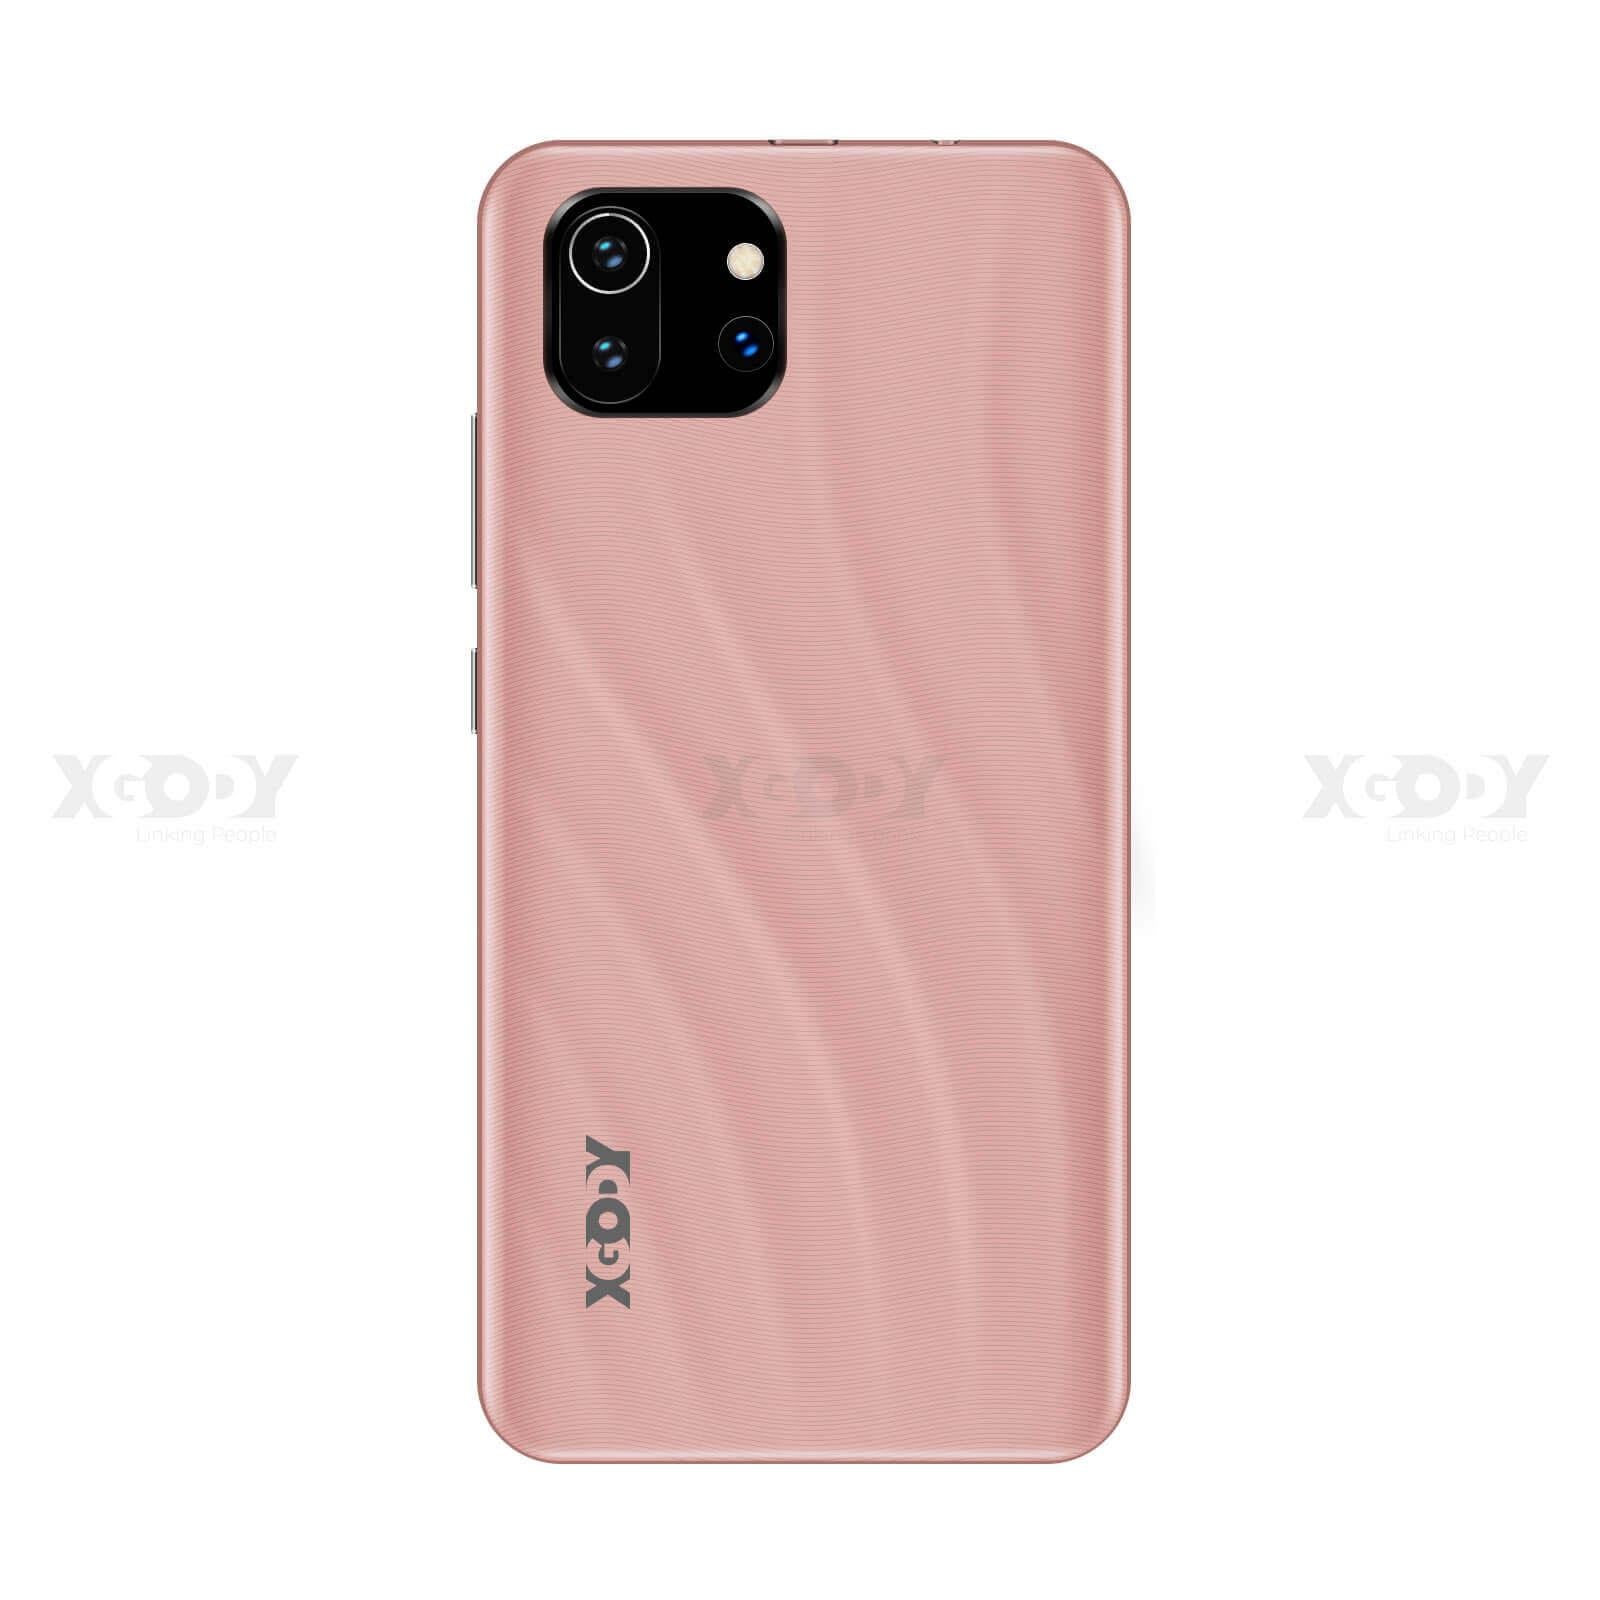 Cost-effective and Most worthwhile Xgody K40 New Android Smart Face Unlock Cell Phone With High GPS And Dual SIM Quad Core - XGODY 